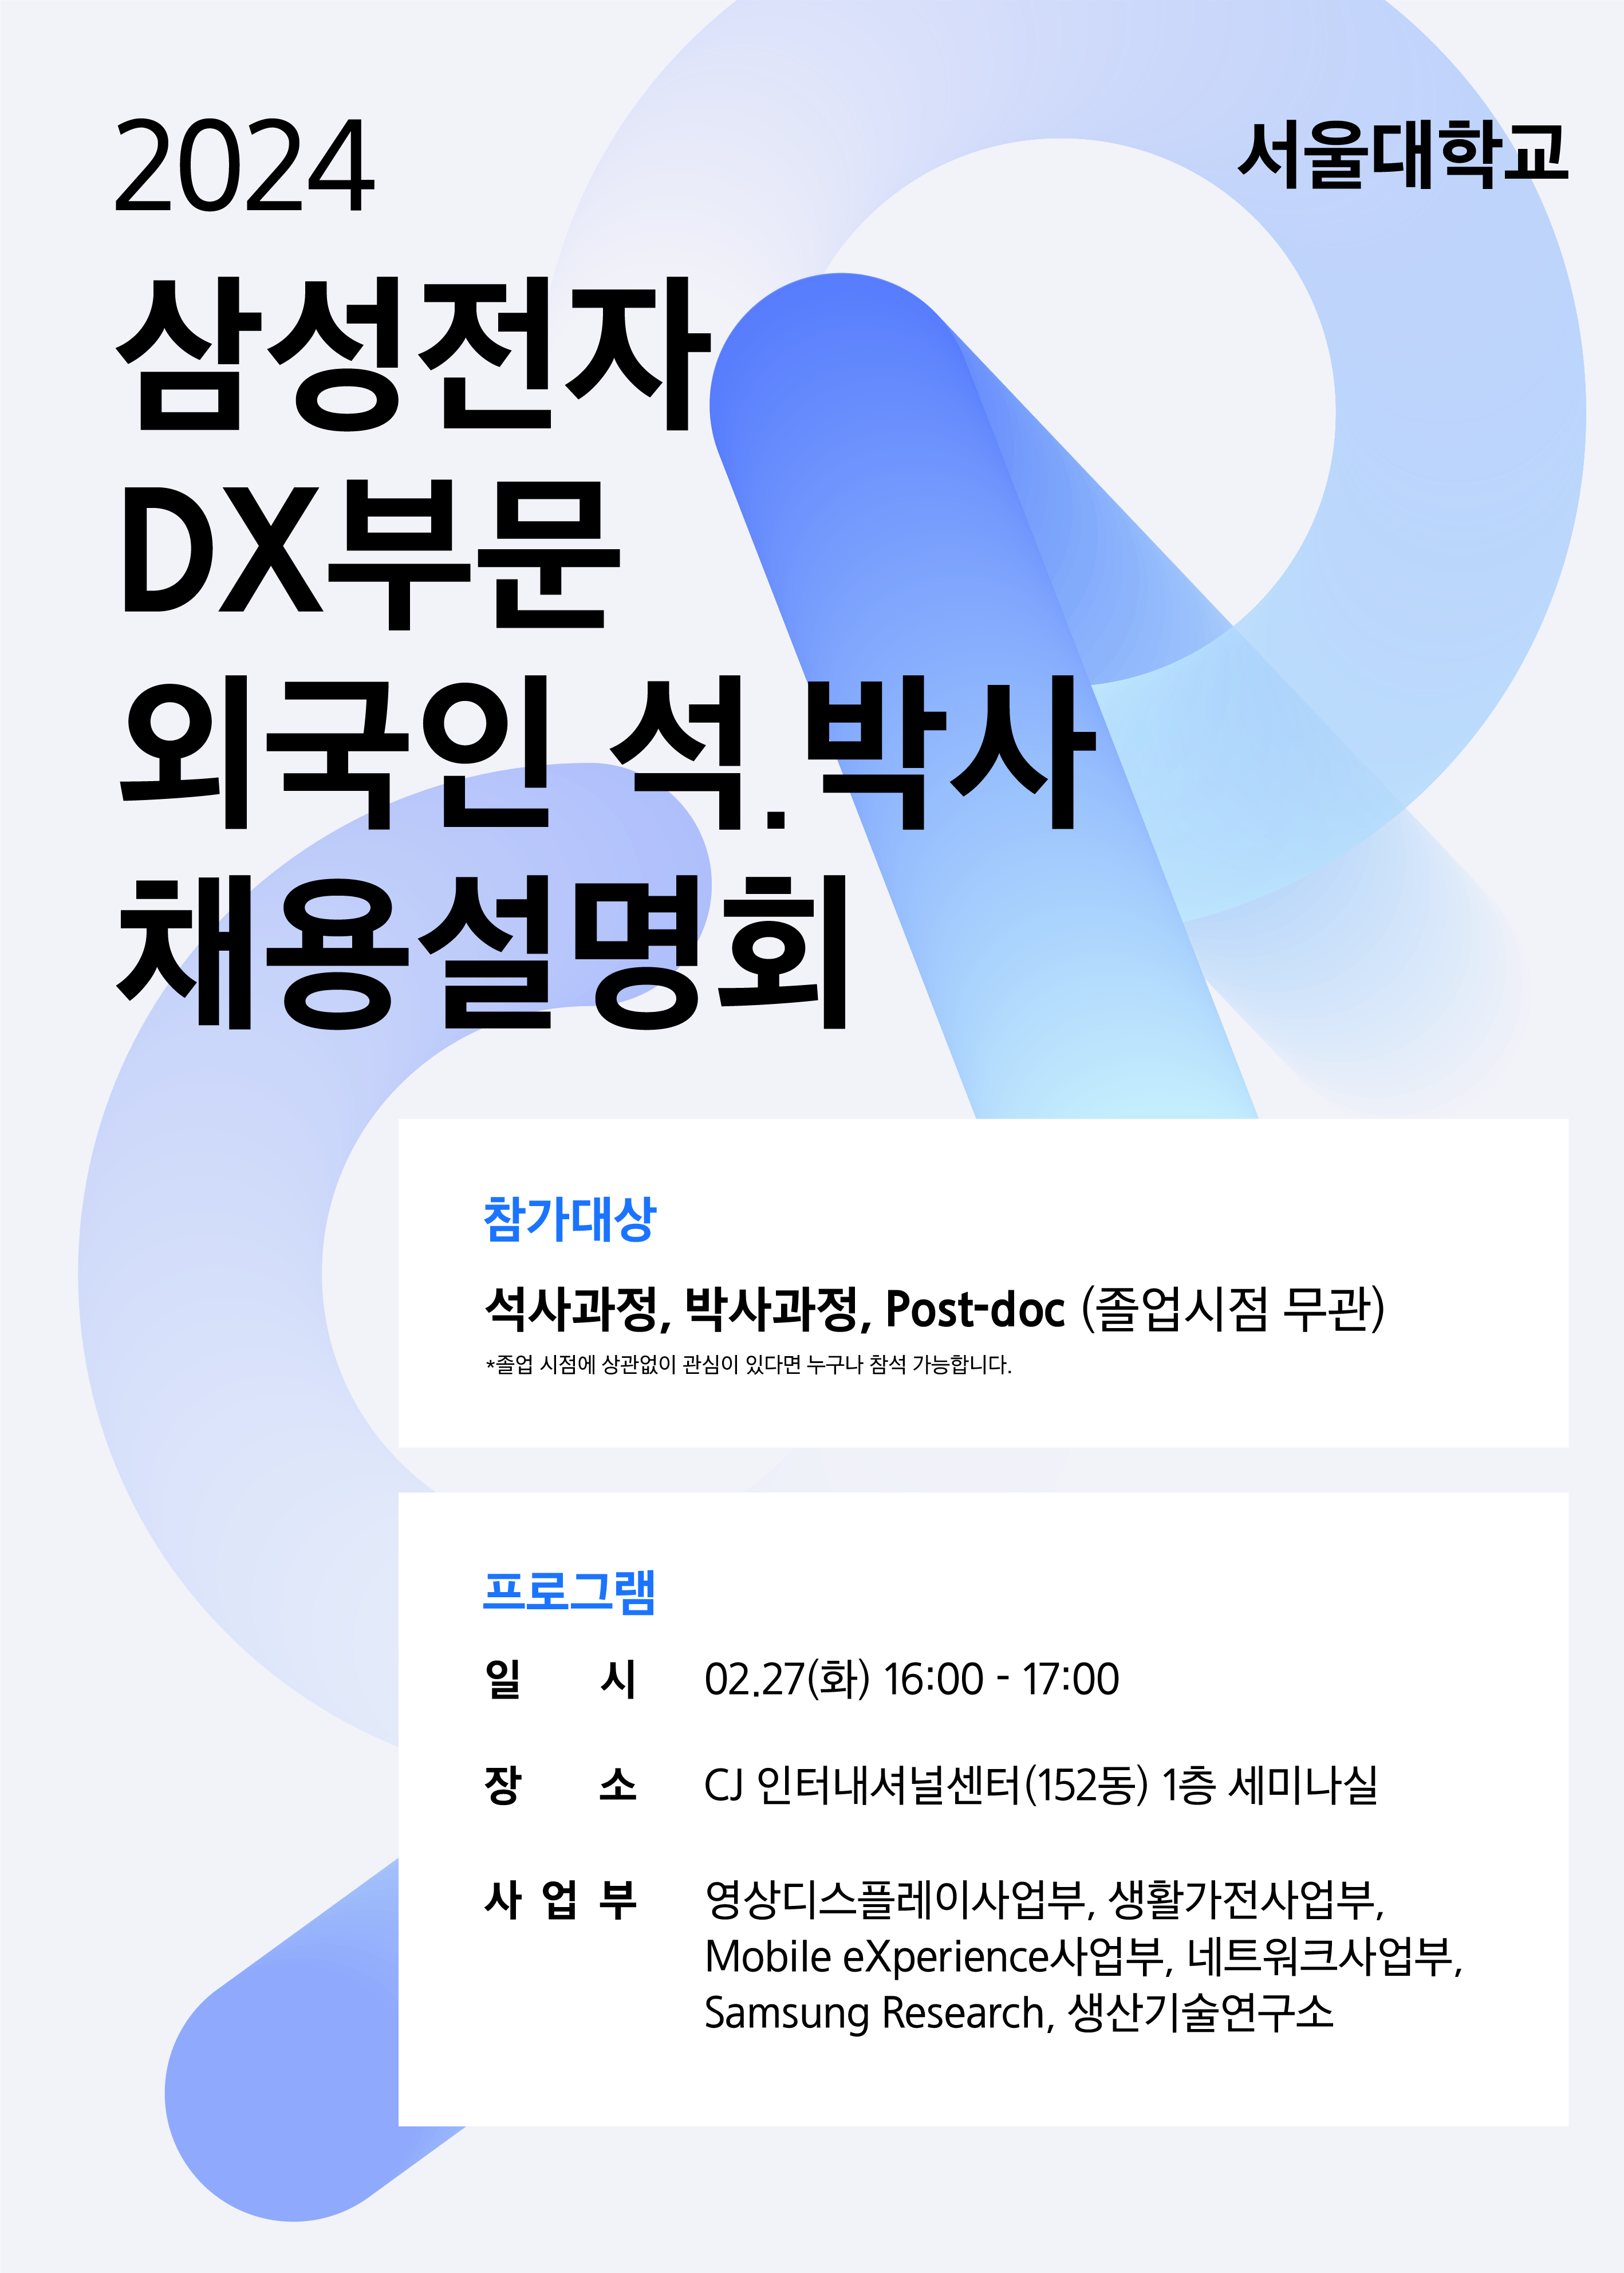 Reminder: Samsung Electronics DX Division Recruitment Information Session For Master/PhD.